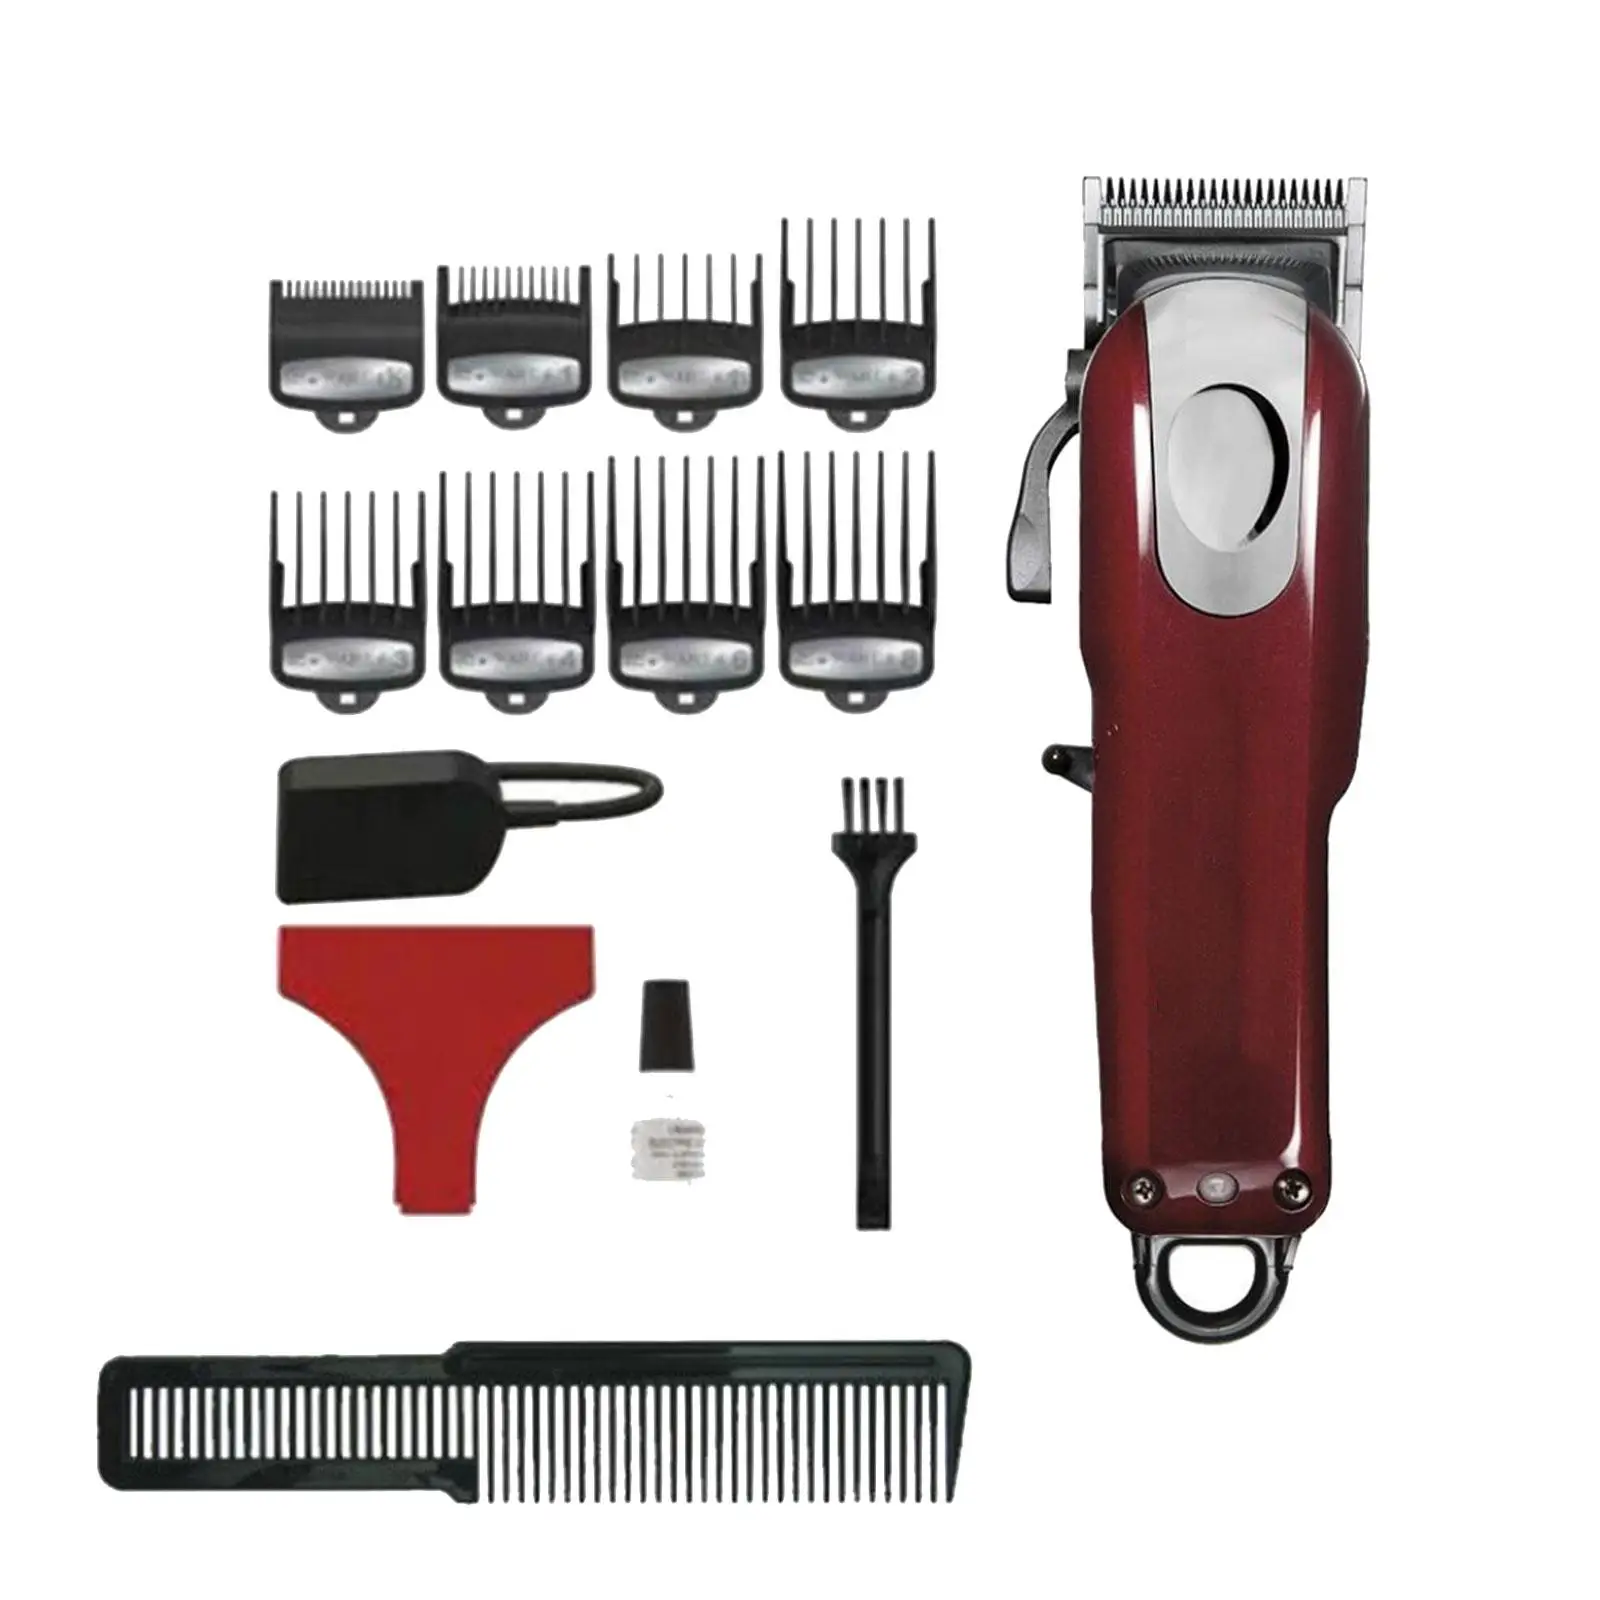 Hair Clipper Kit 8148 Machine EU Power Adapter with Oil, Cutting Guides, Styling Comb Versatile Sturdy Cord and Cordless T Blade